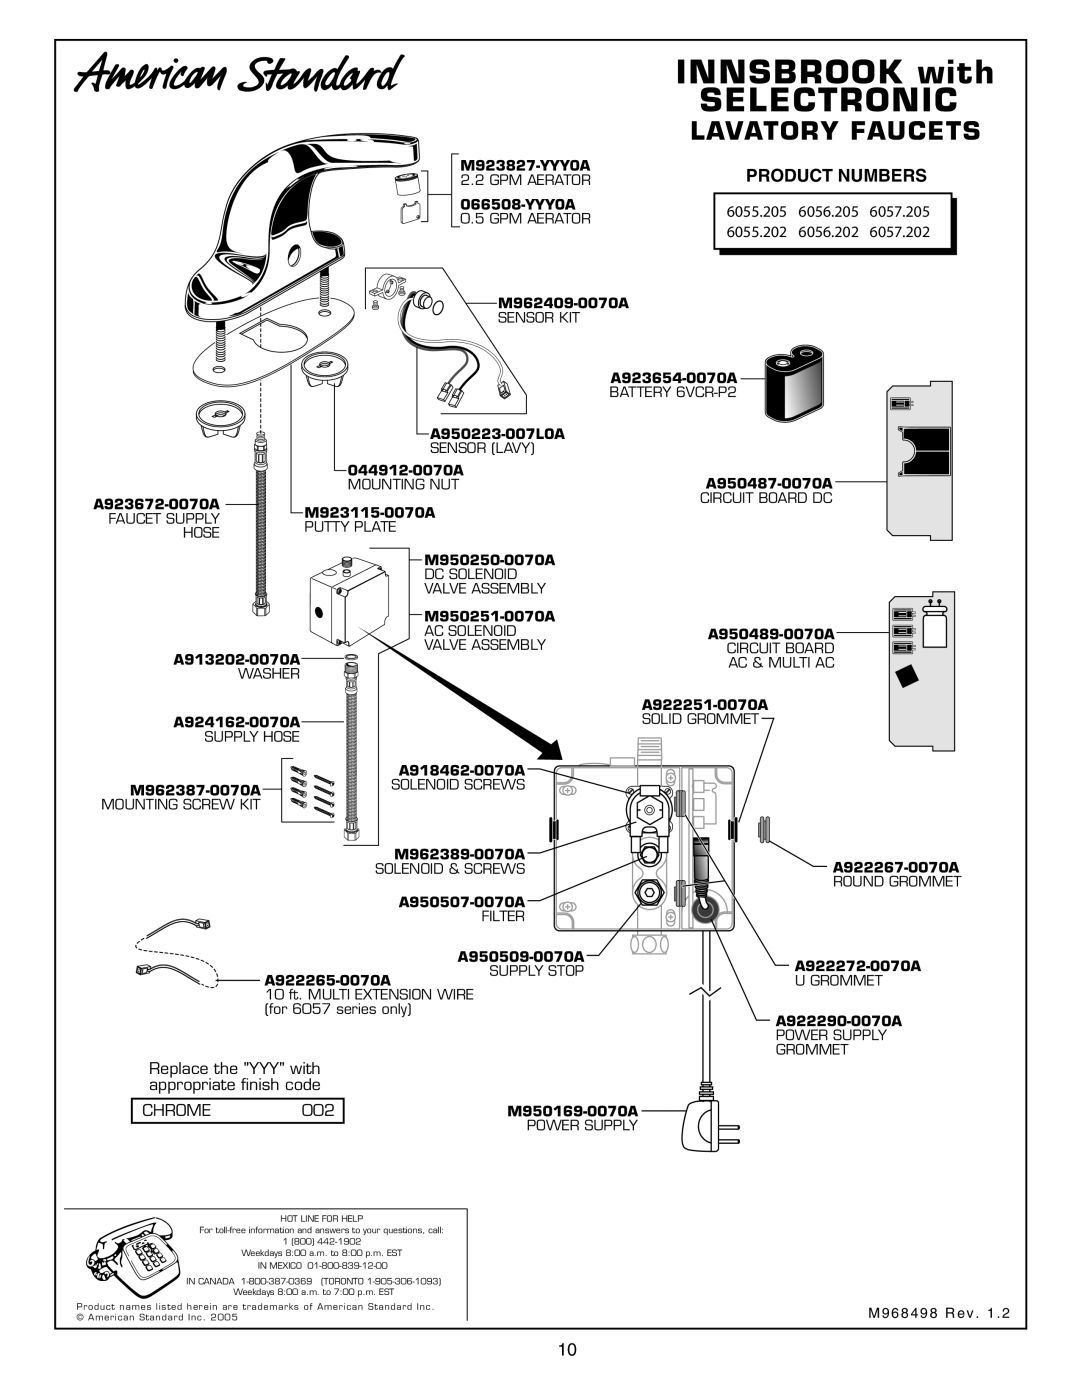 American Standard M968498 warranty Lavatory Faucets, INNSBROOK with SELECTRONIC 